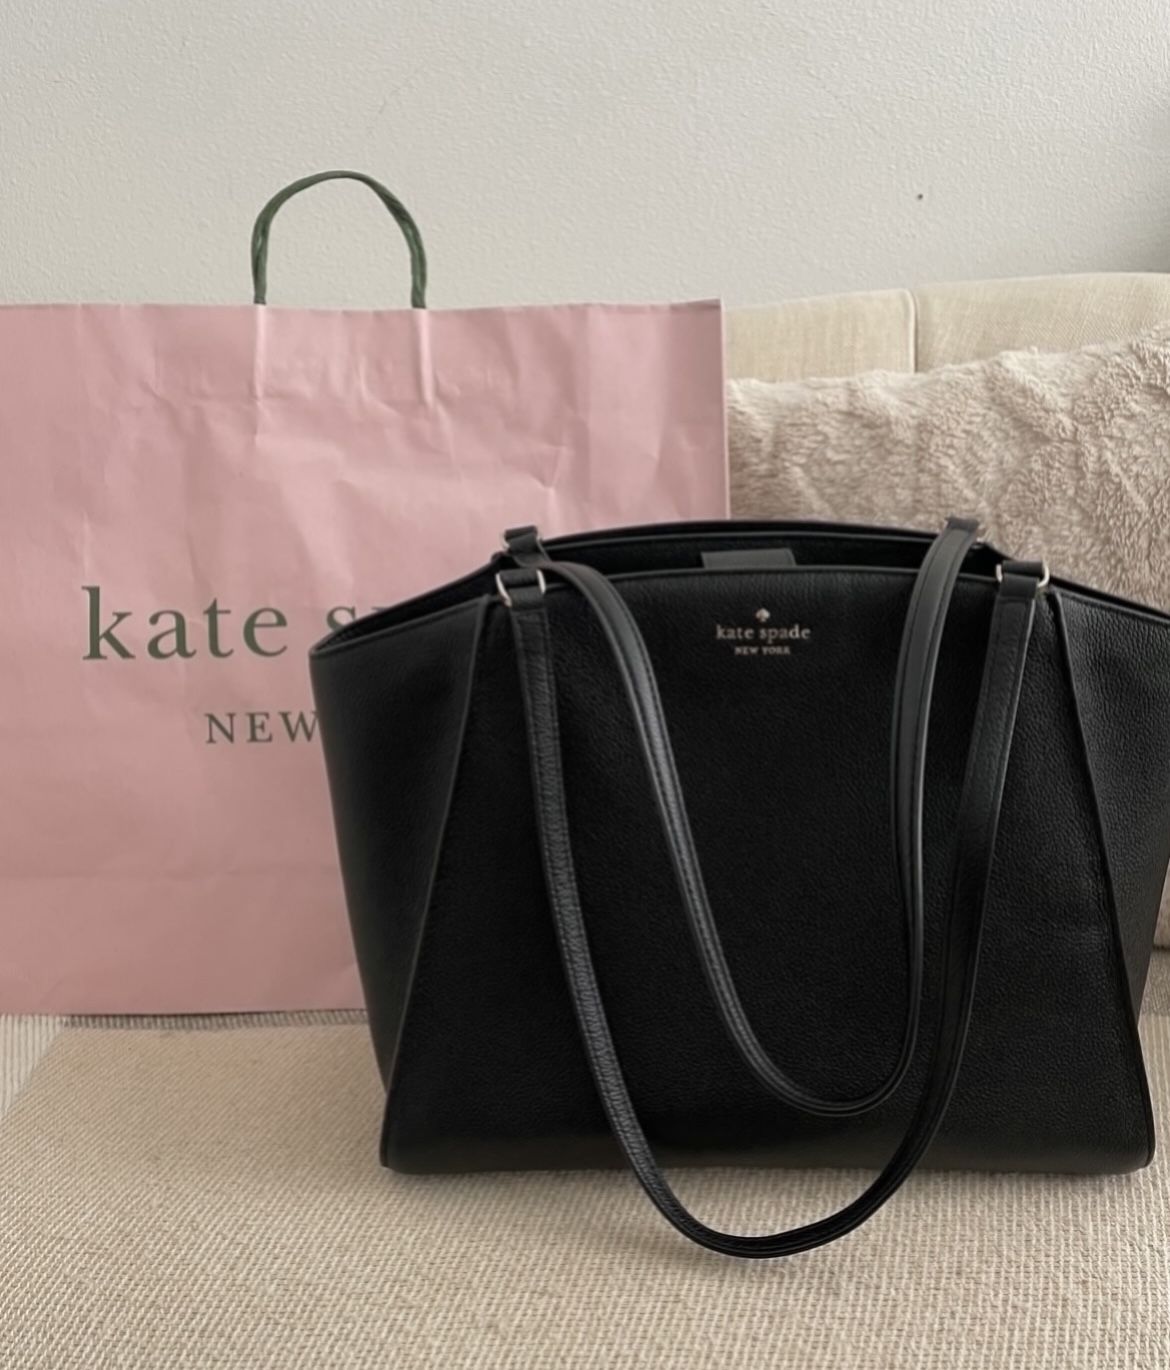 Kate Spade Brim Large Leather Tote with Detachable Laptop